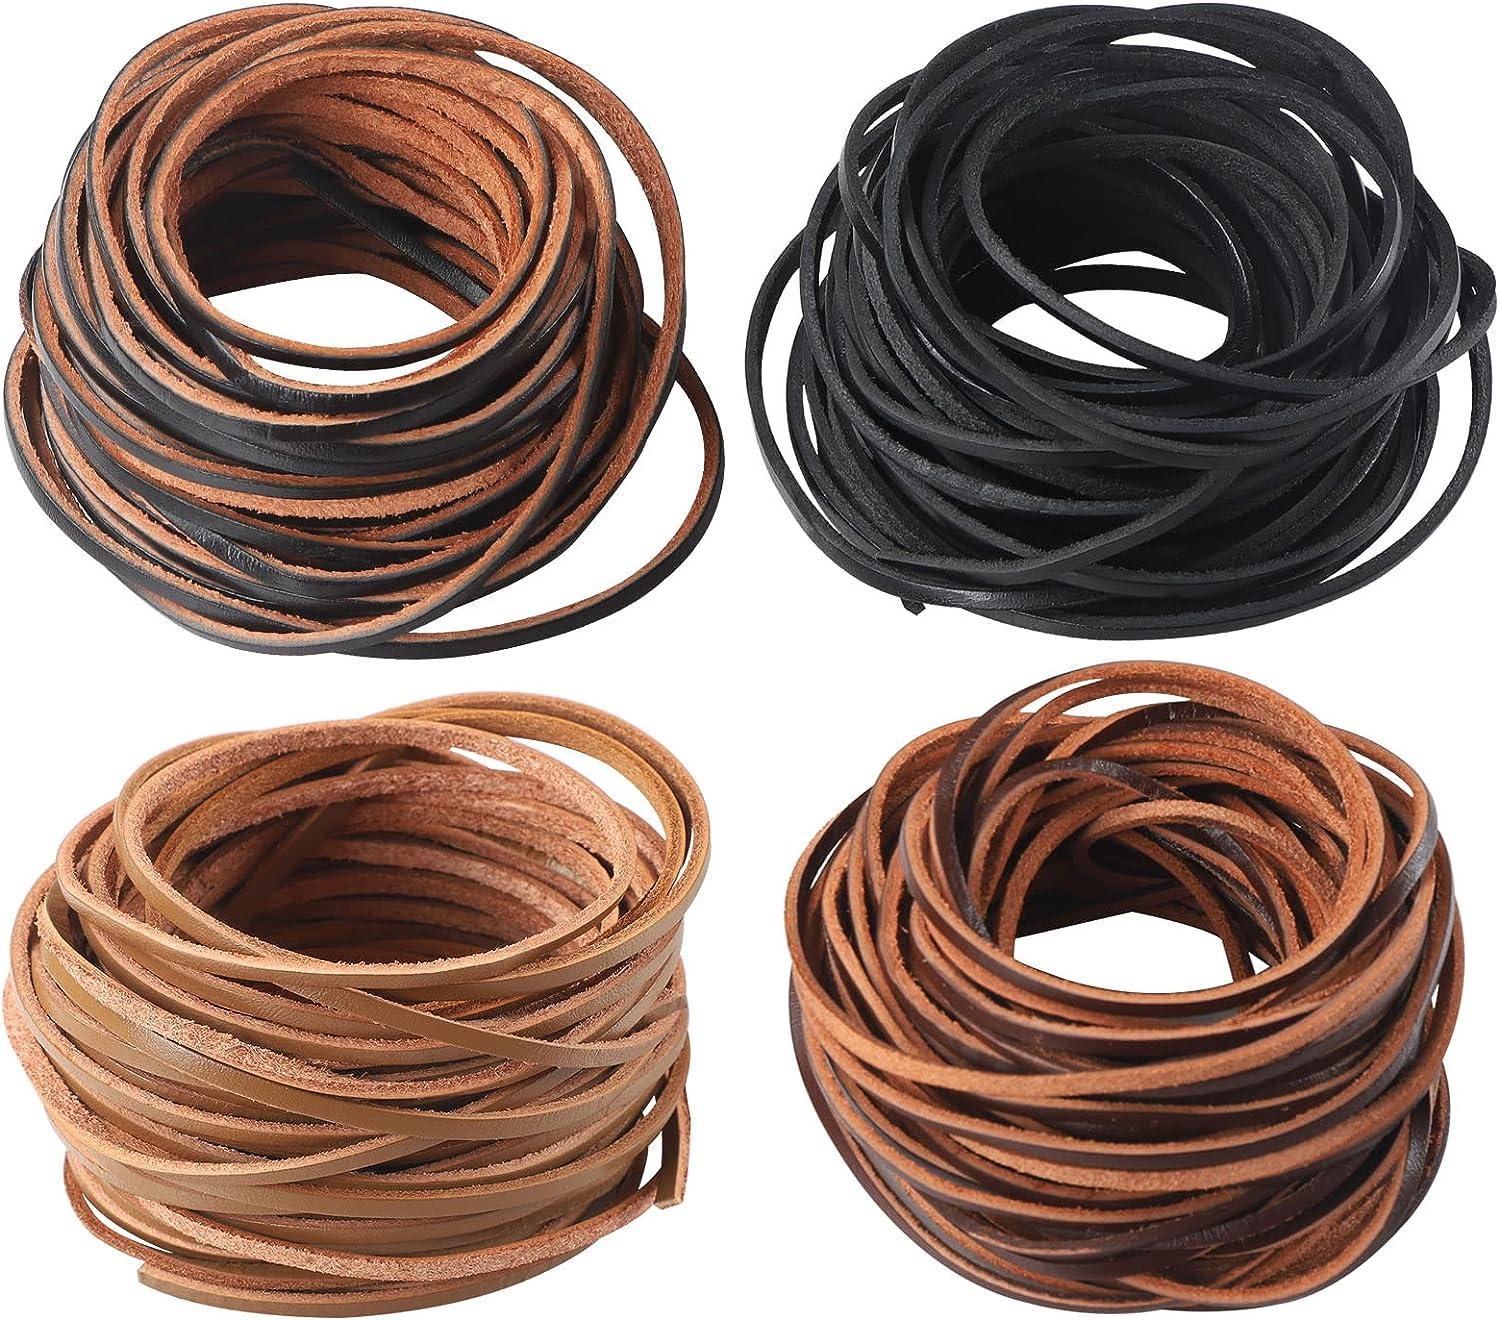 1 Meter Extra Thick Genuine 3mm Flat LEATHER String CORD DIY ~2mm